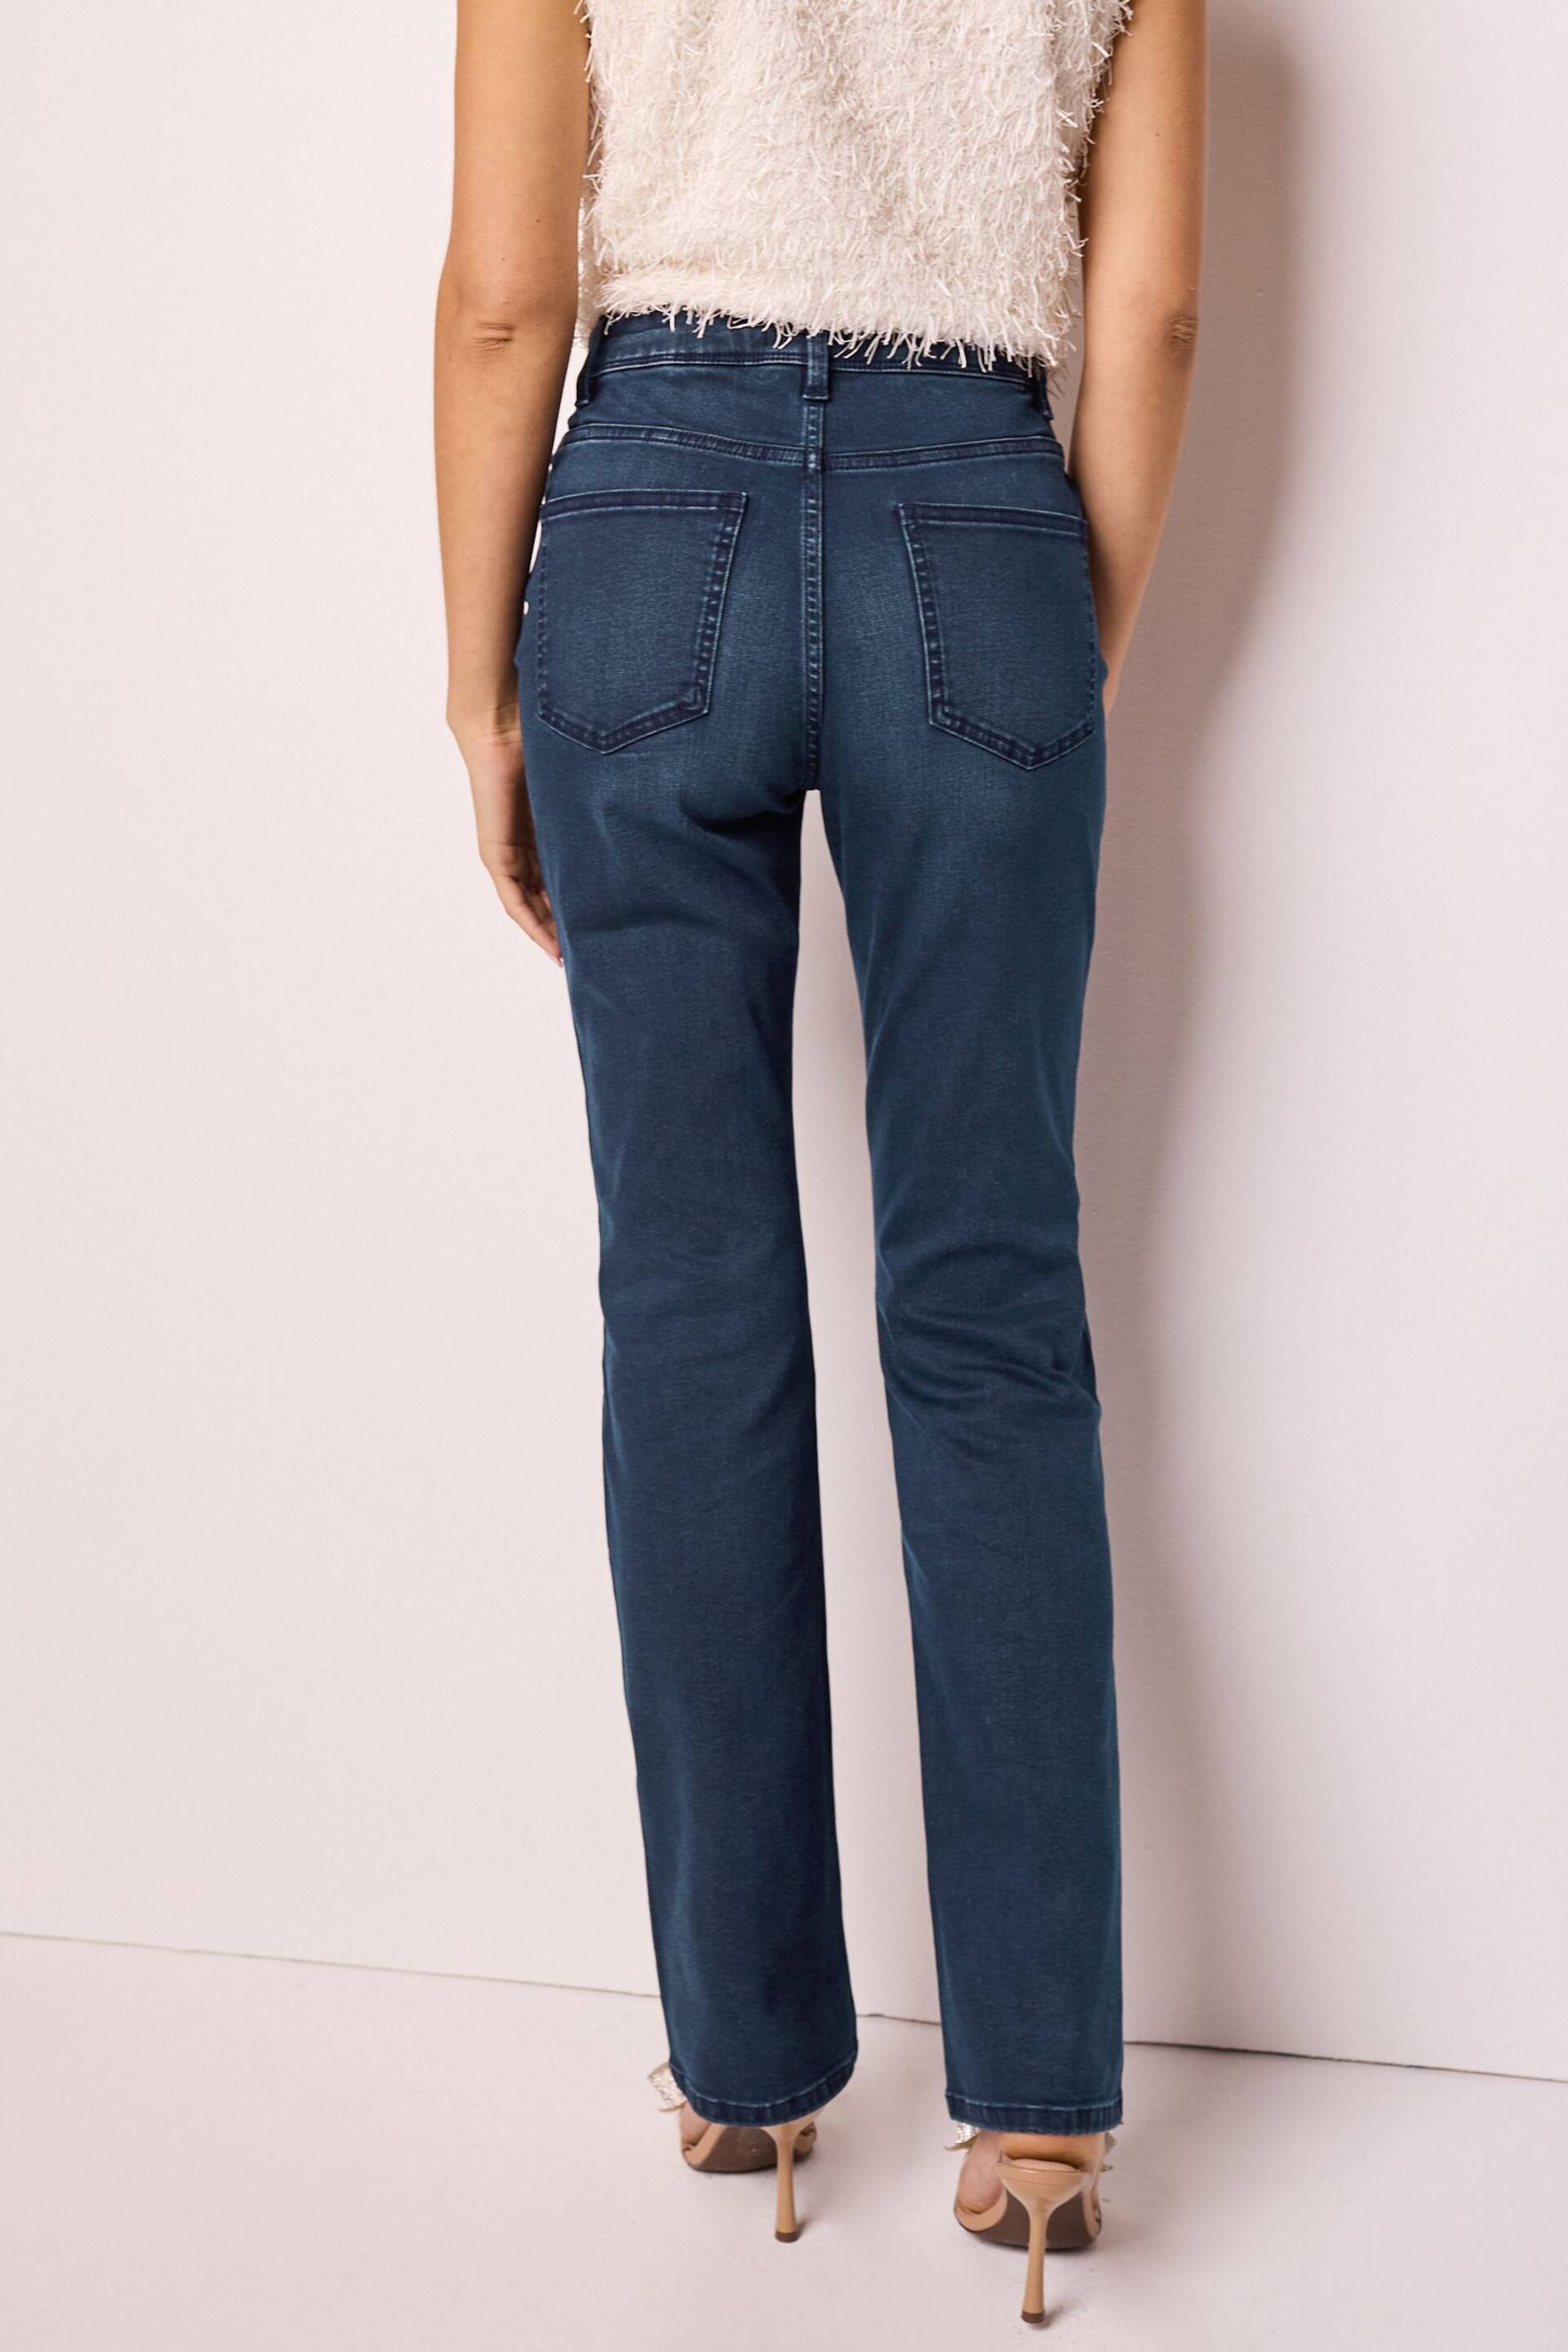 Inky Blue Wash Bootcut Jeans - Image 3 of 6